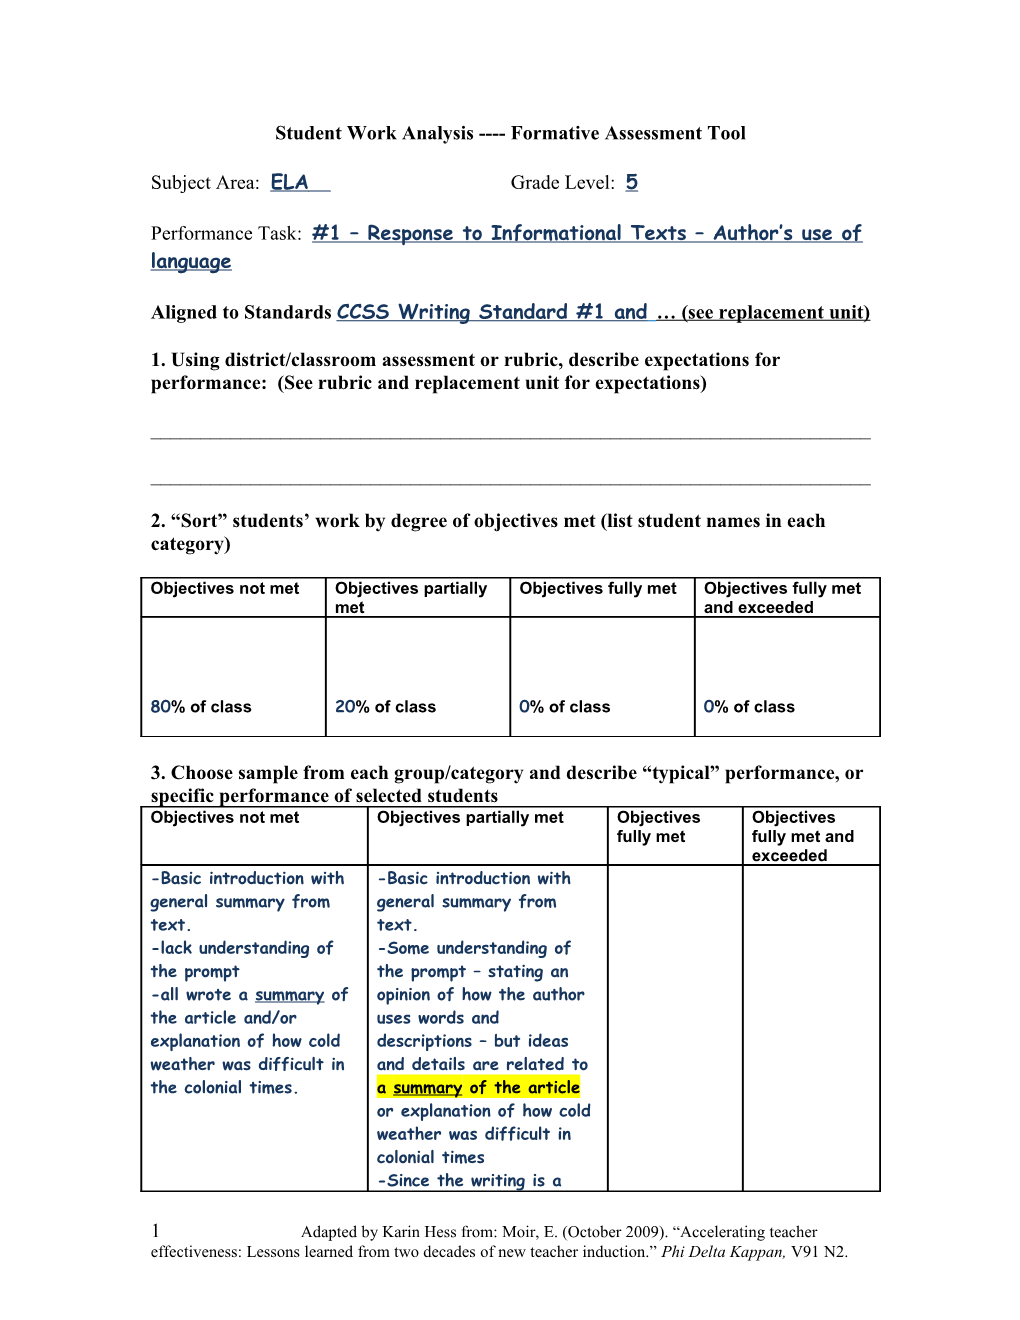 Student Work Analysis Formative Assessment Tool